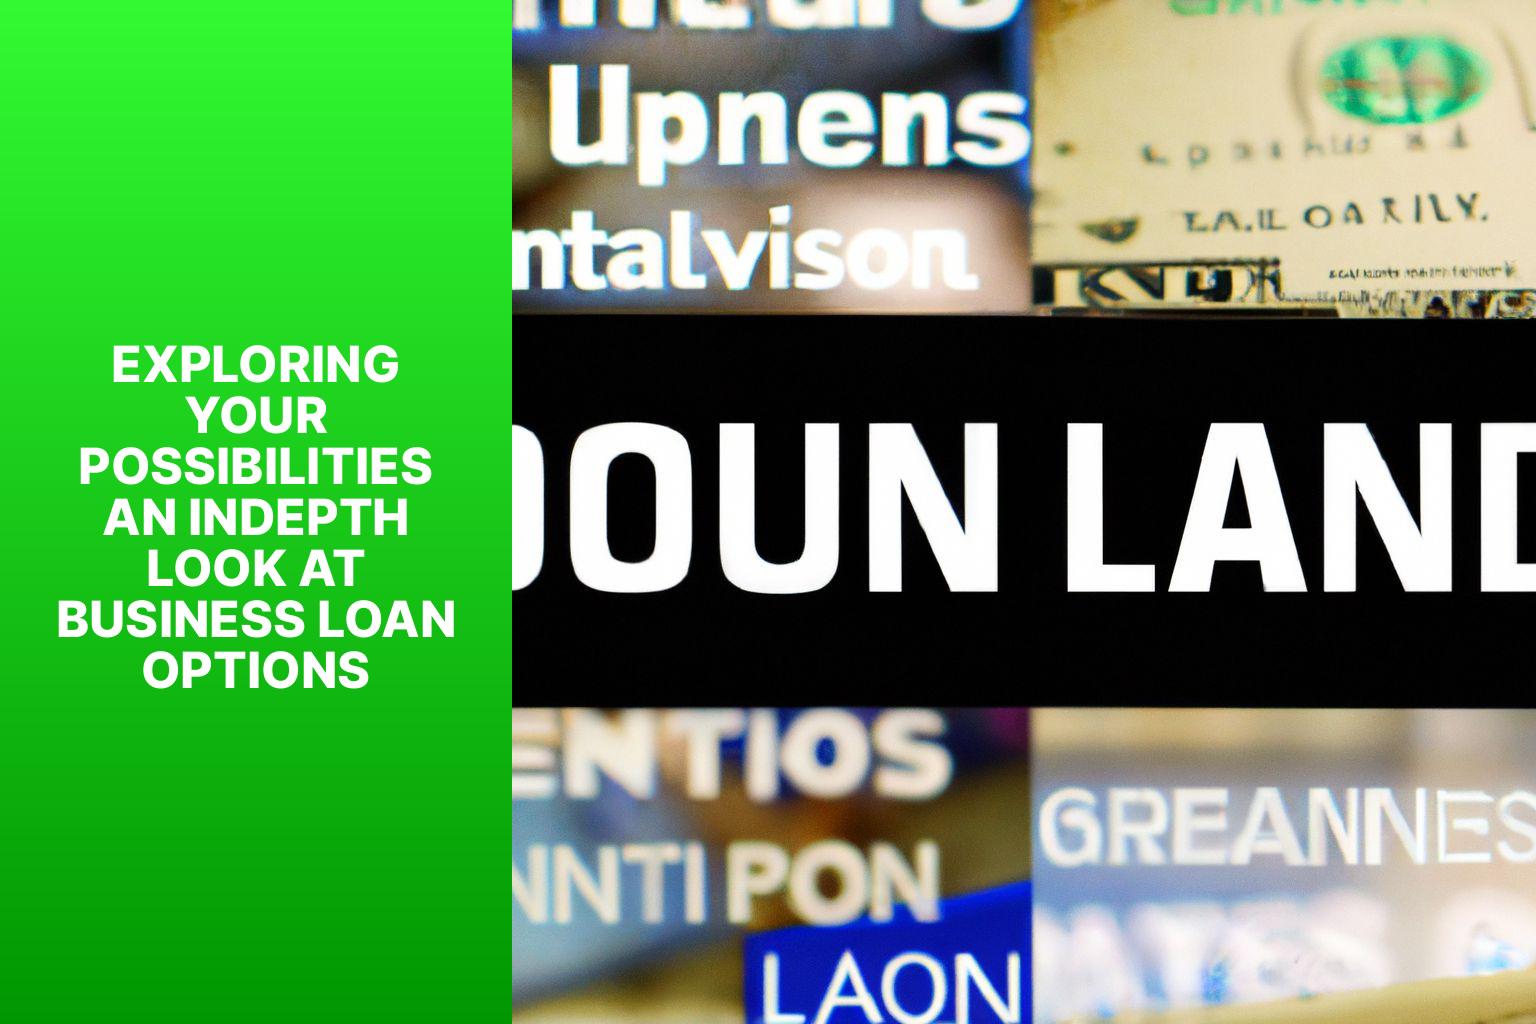 Exploring Your Possibilities An Indepth Look at Business Loan Options